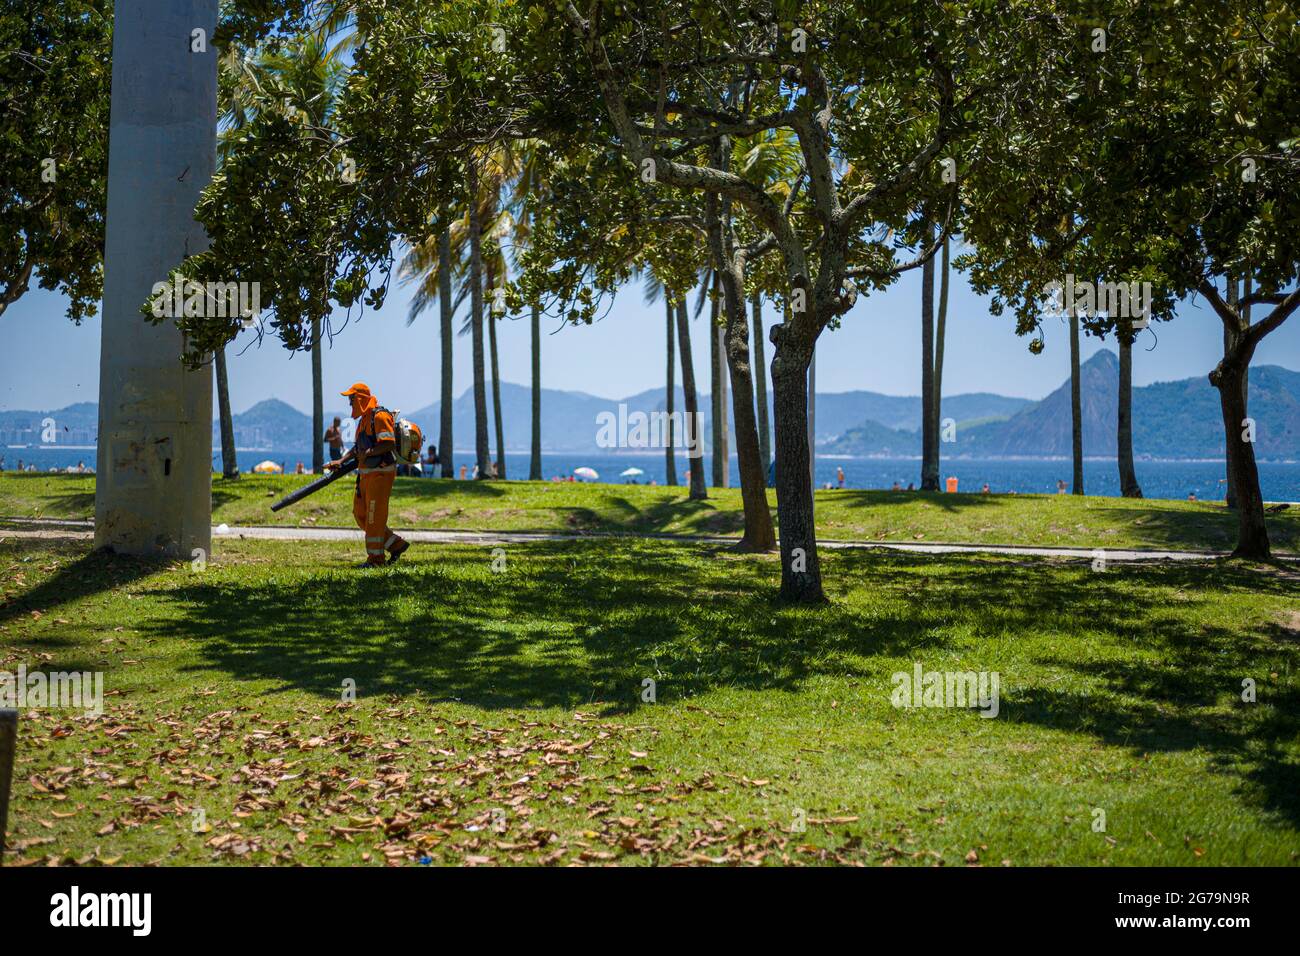 Worker operating heavy duty leaf blower in Flamengo Park - Parque Aterro do Flamengo - in Rio de Janeiro. An extensive beachfront park with sports fields, walking/cycling paths, a skate park & art museum. Stock Photo